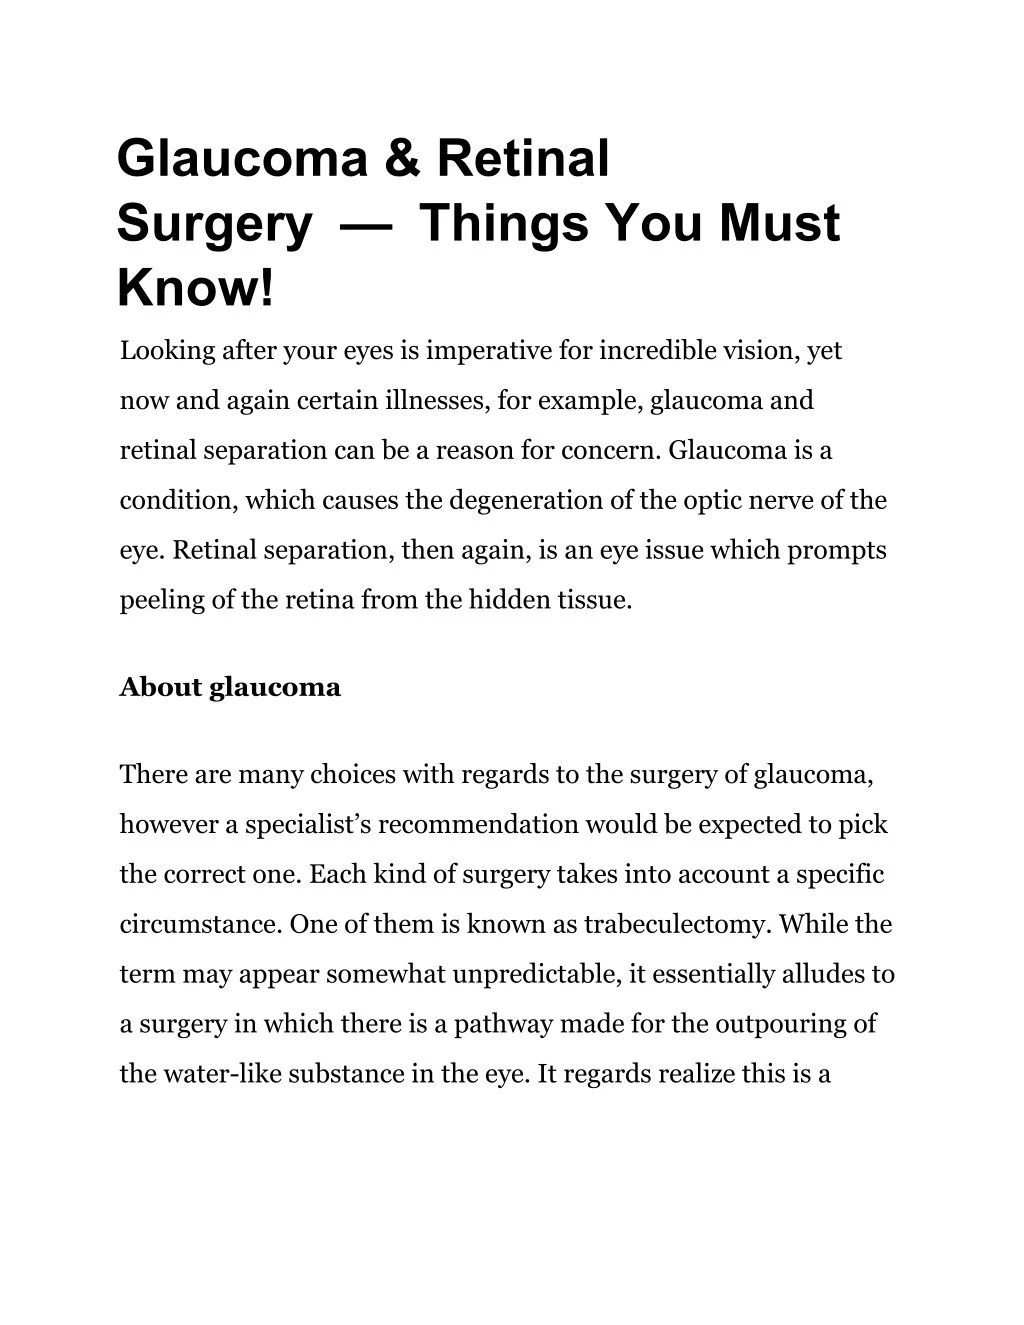 glaucoma retinal surgery things you must know